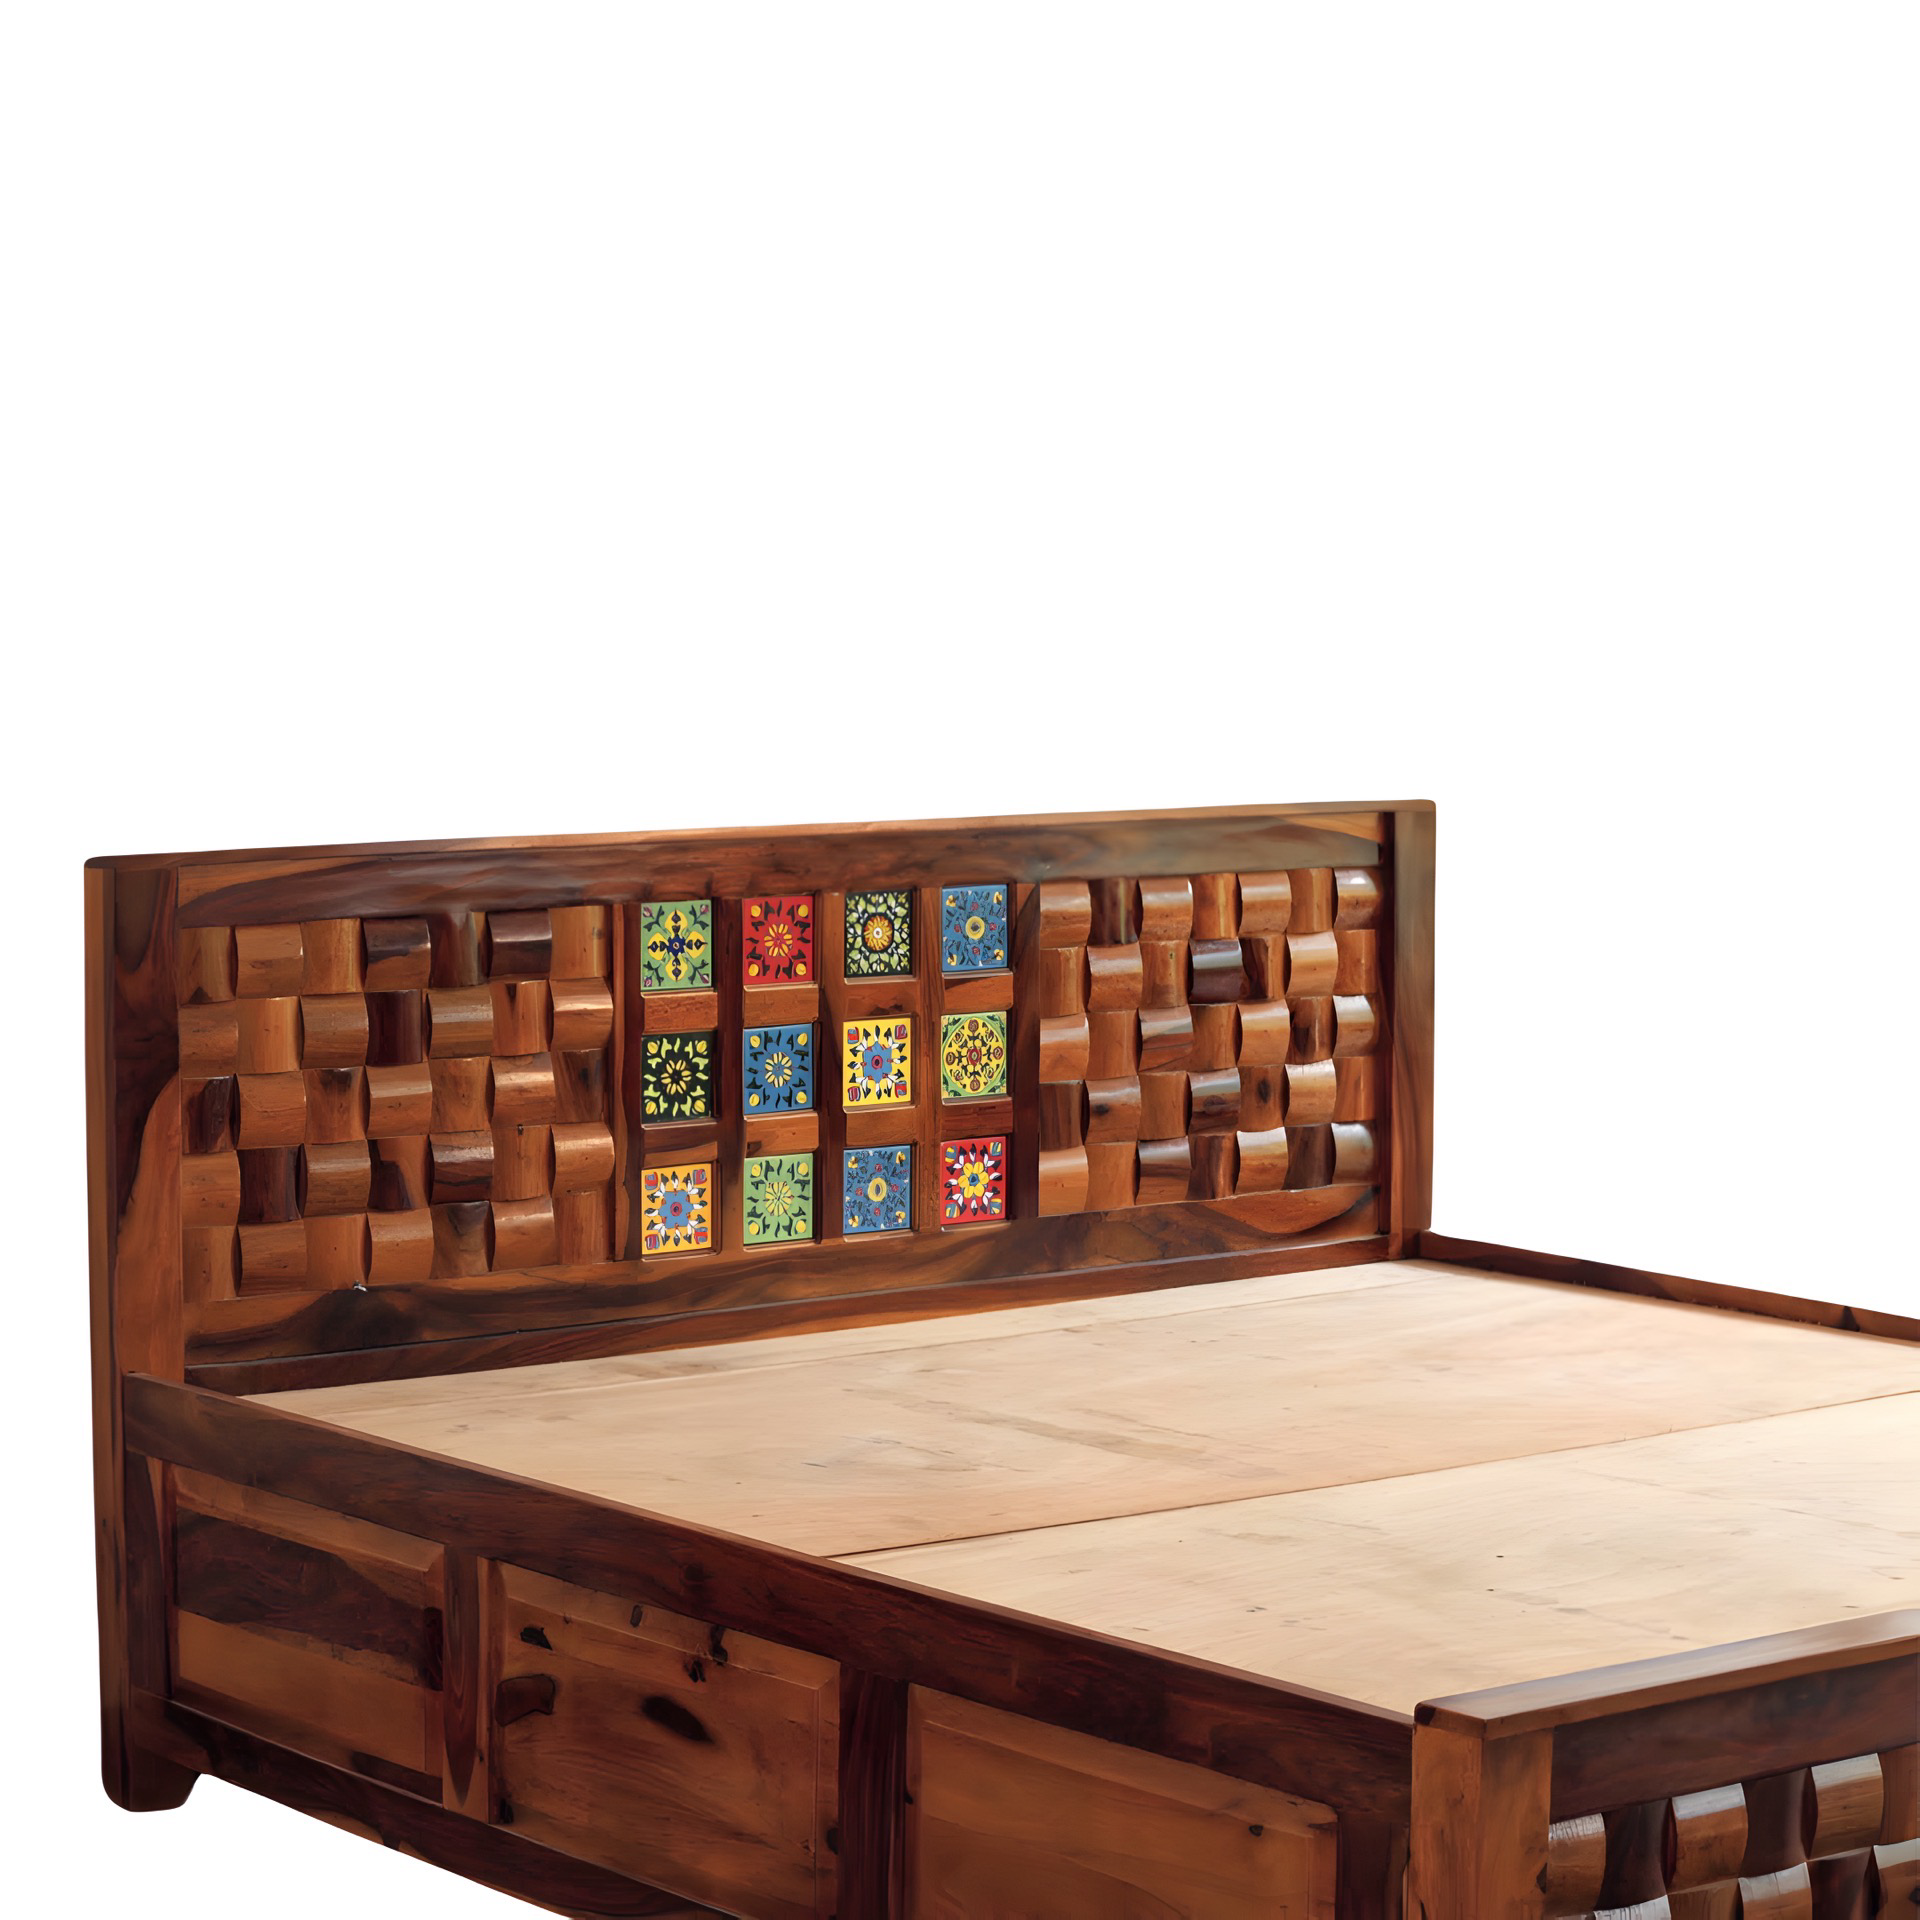 'Transform your bedroom with our exquisite collection of Tiles Plane Solid Wood Storage Bed, with traditional Rajasthani tile designs while experiencing true comfort in king or queen size variants.